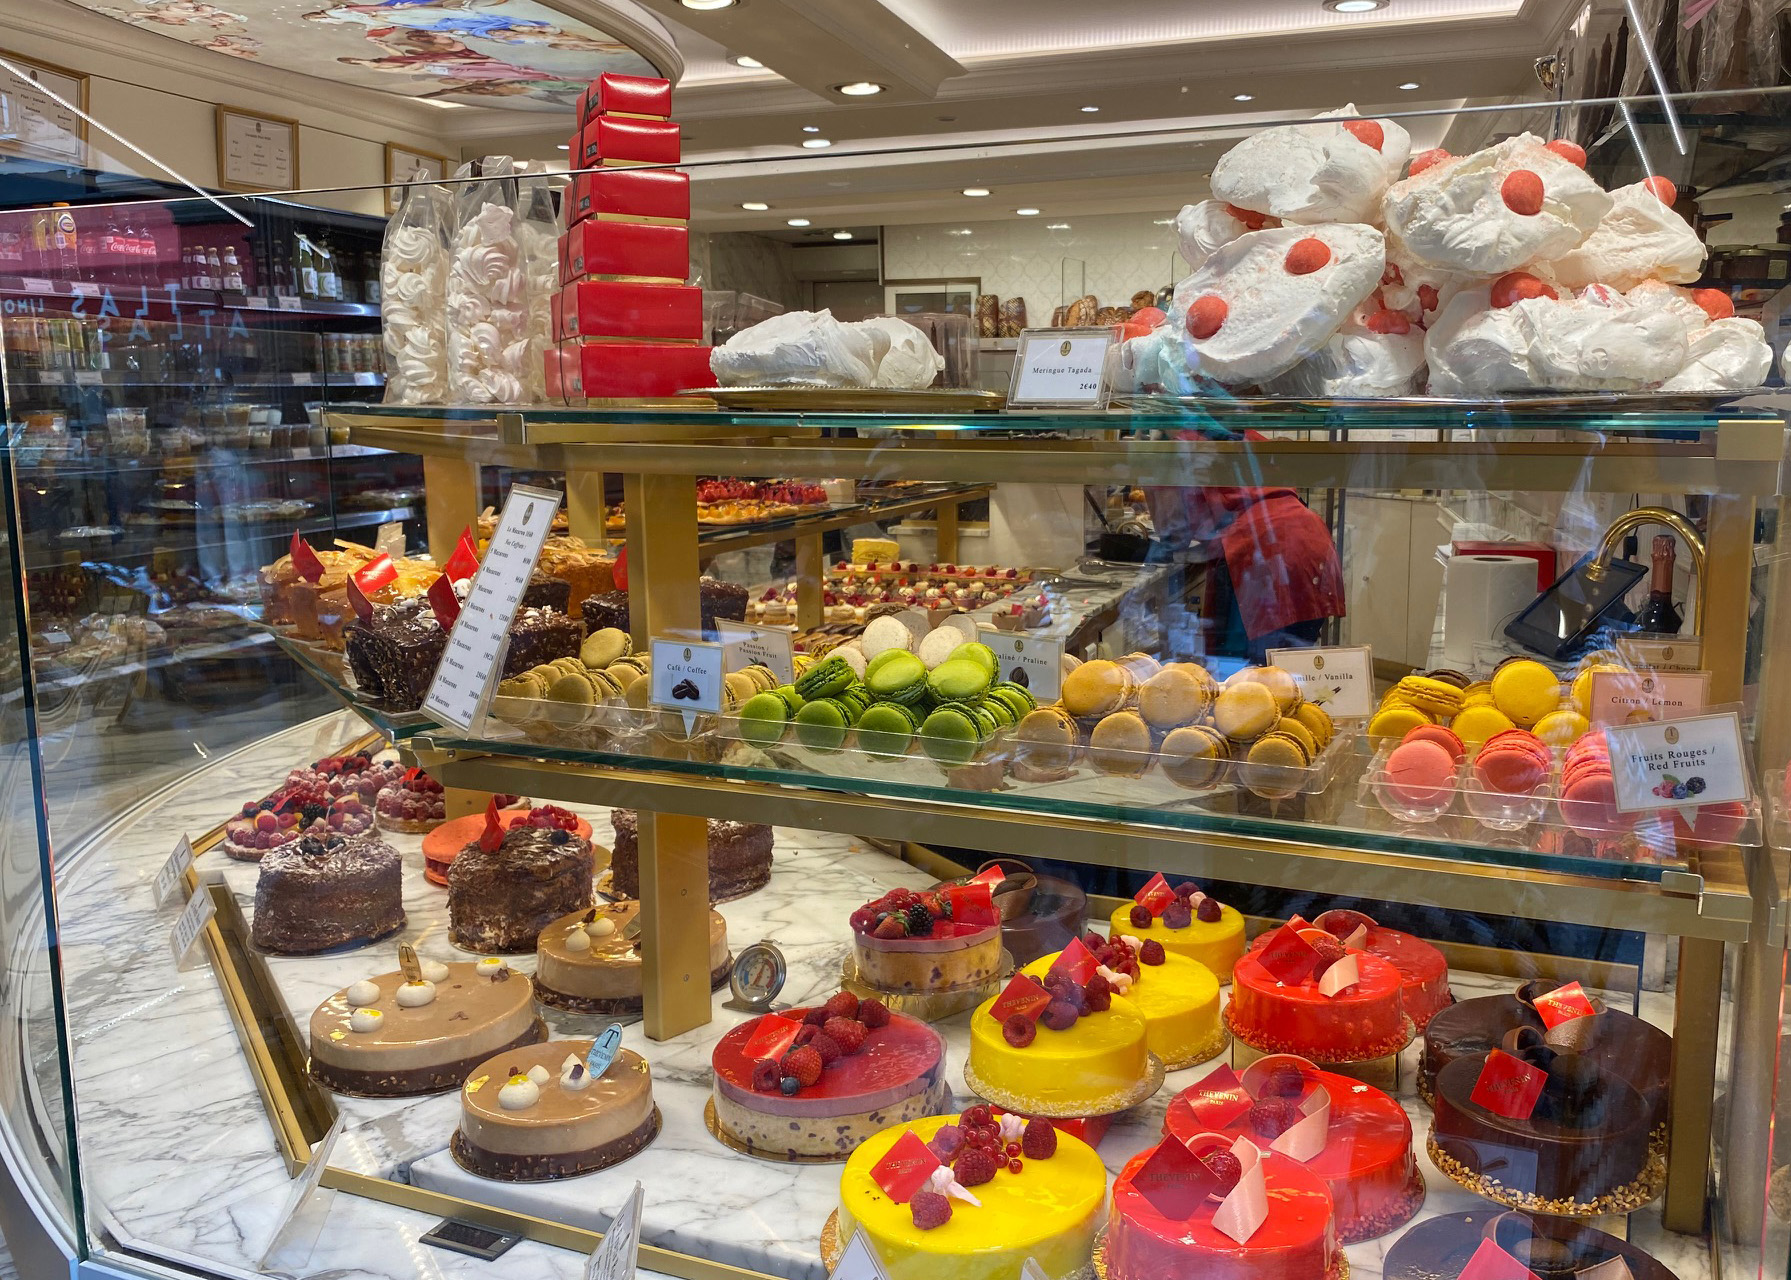 Tartes, Macarons and sweets in a Café in Paris